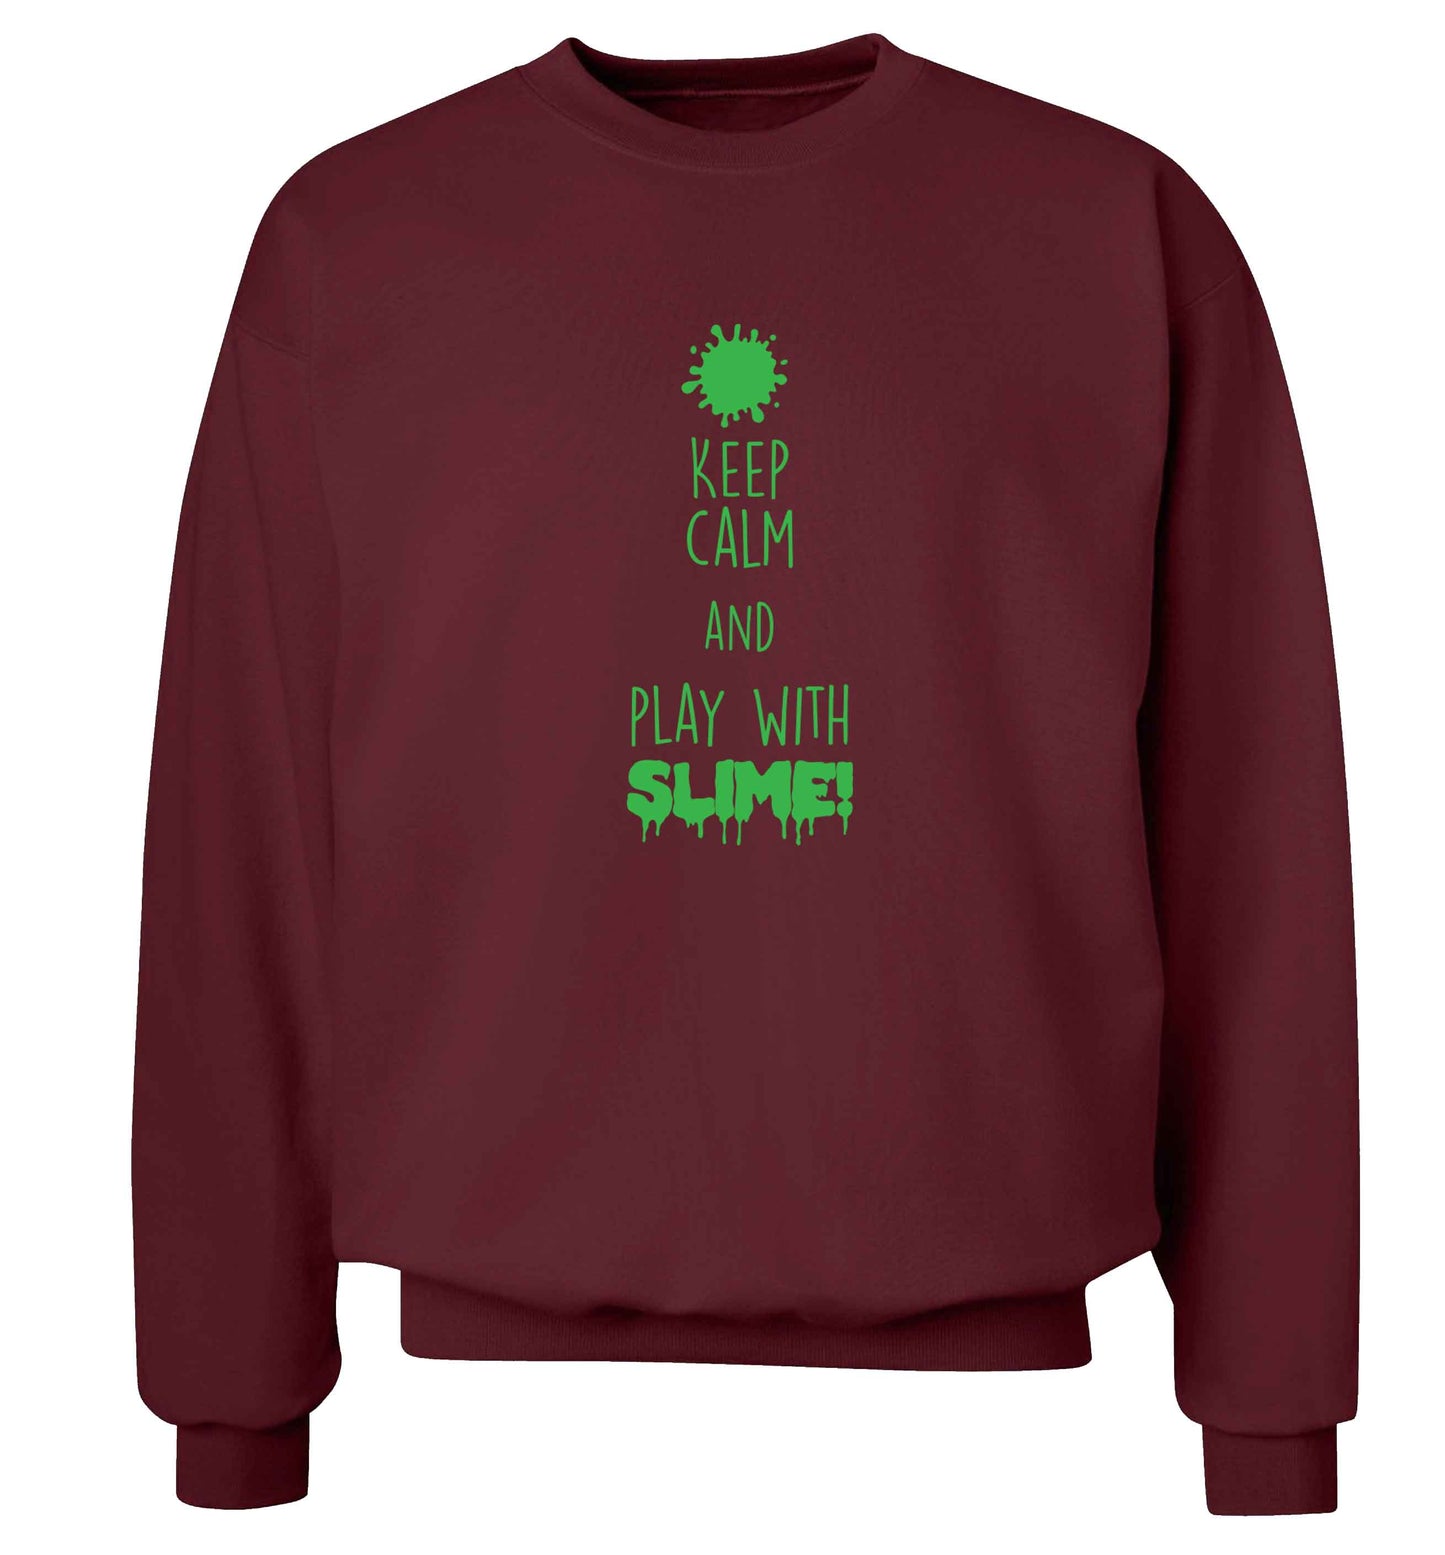 Neon green keep calm and play with slime!adult's unisex maroon sweater 2XL